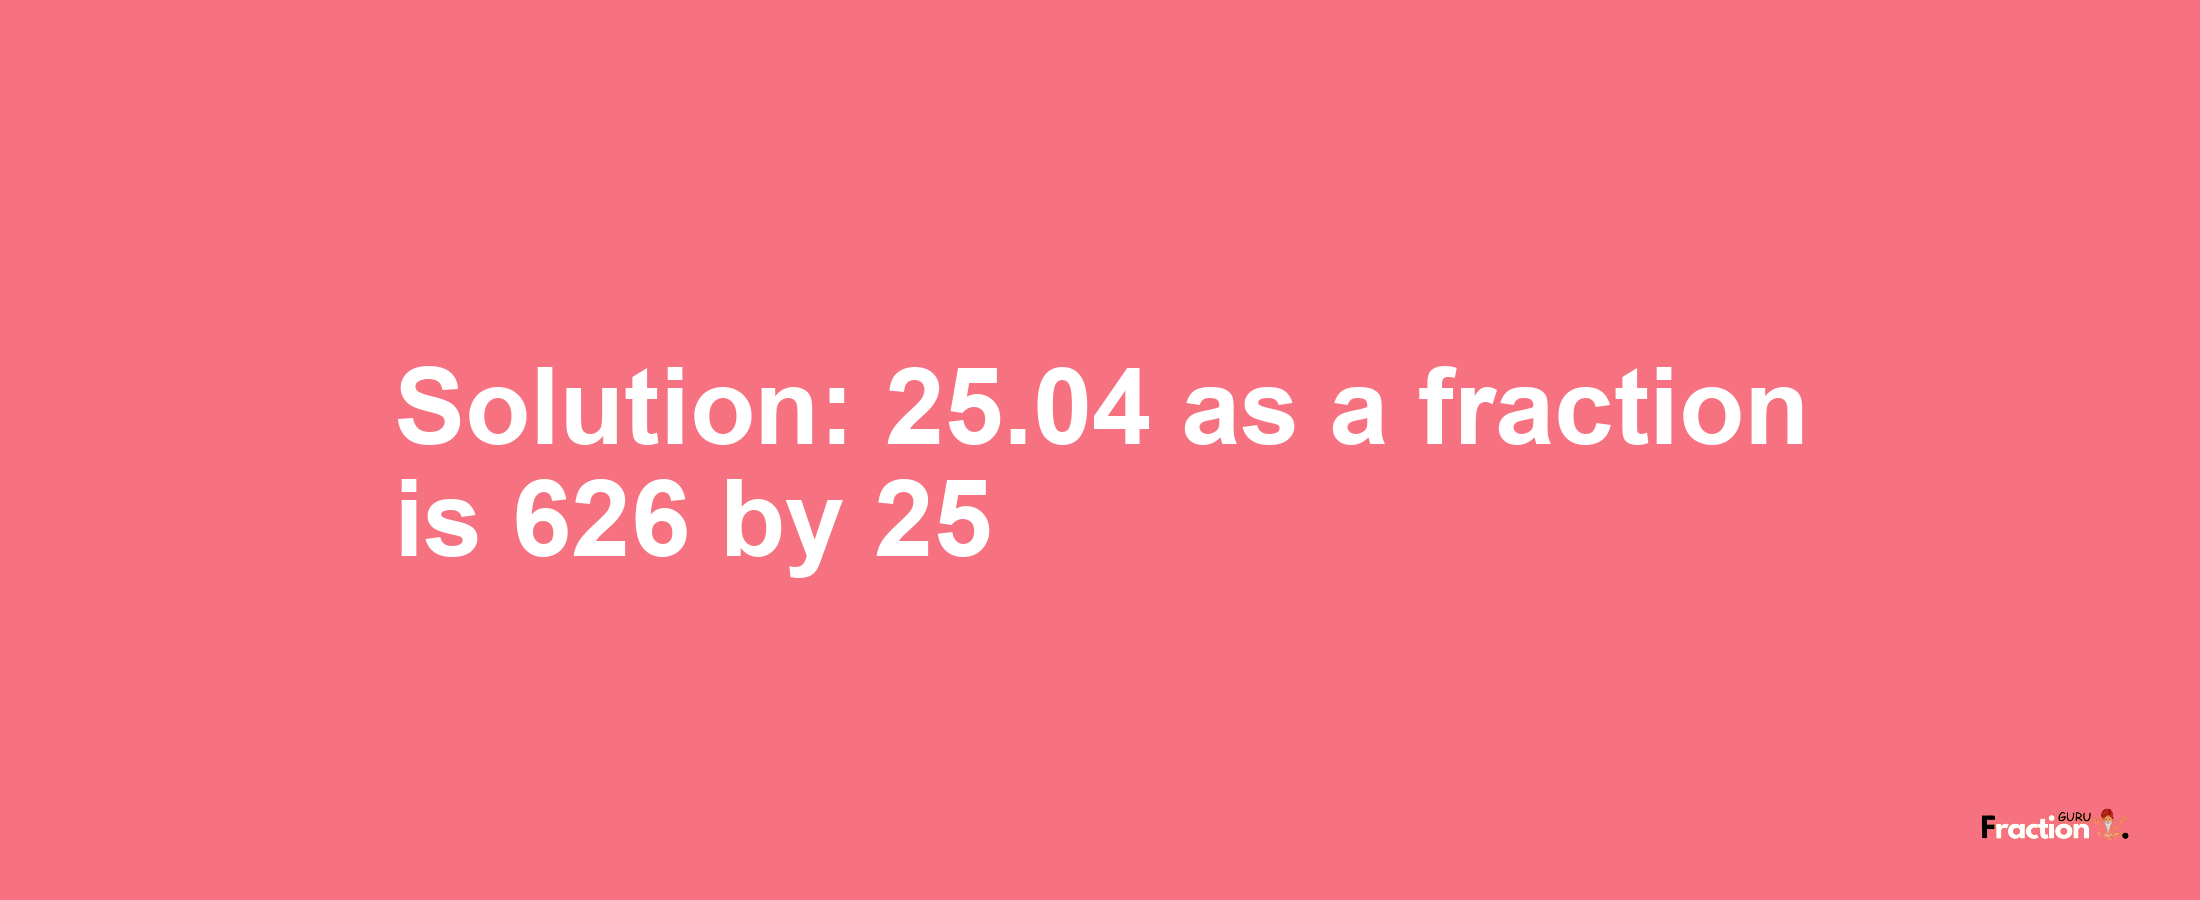 Solution:25.04 as a fraction is 626/25